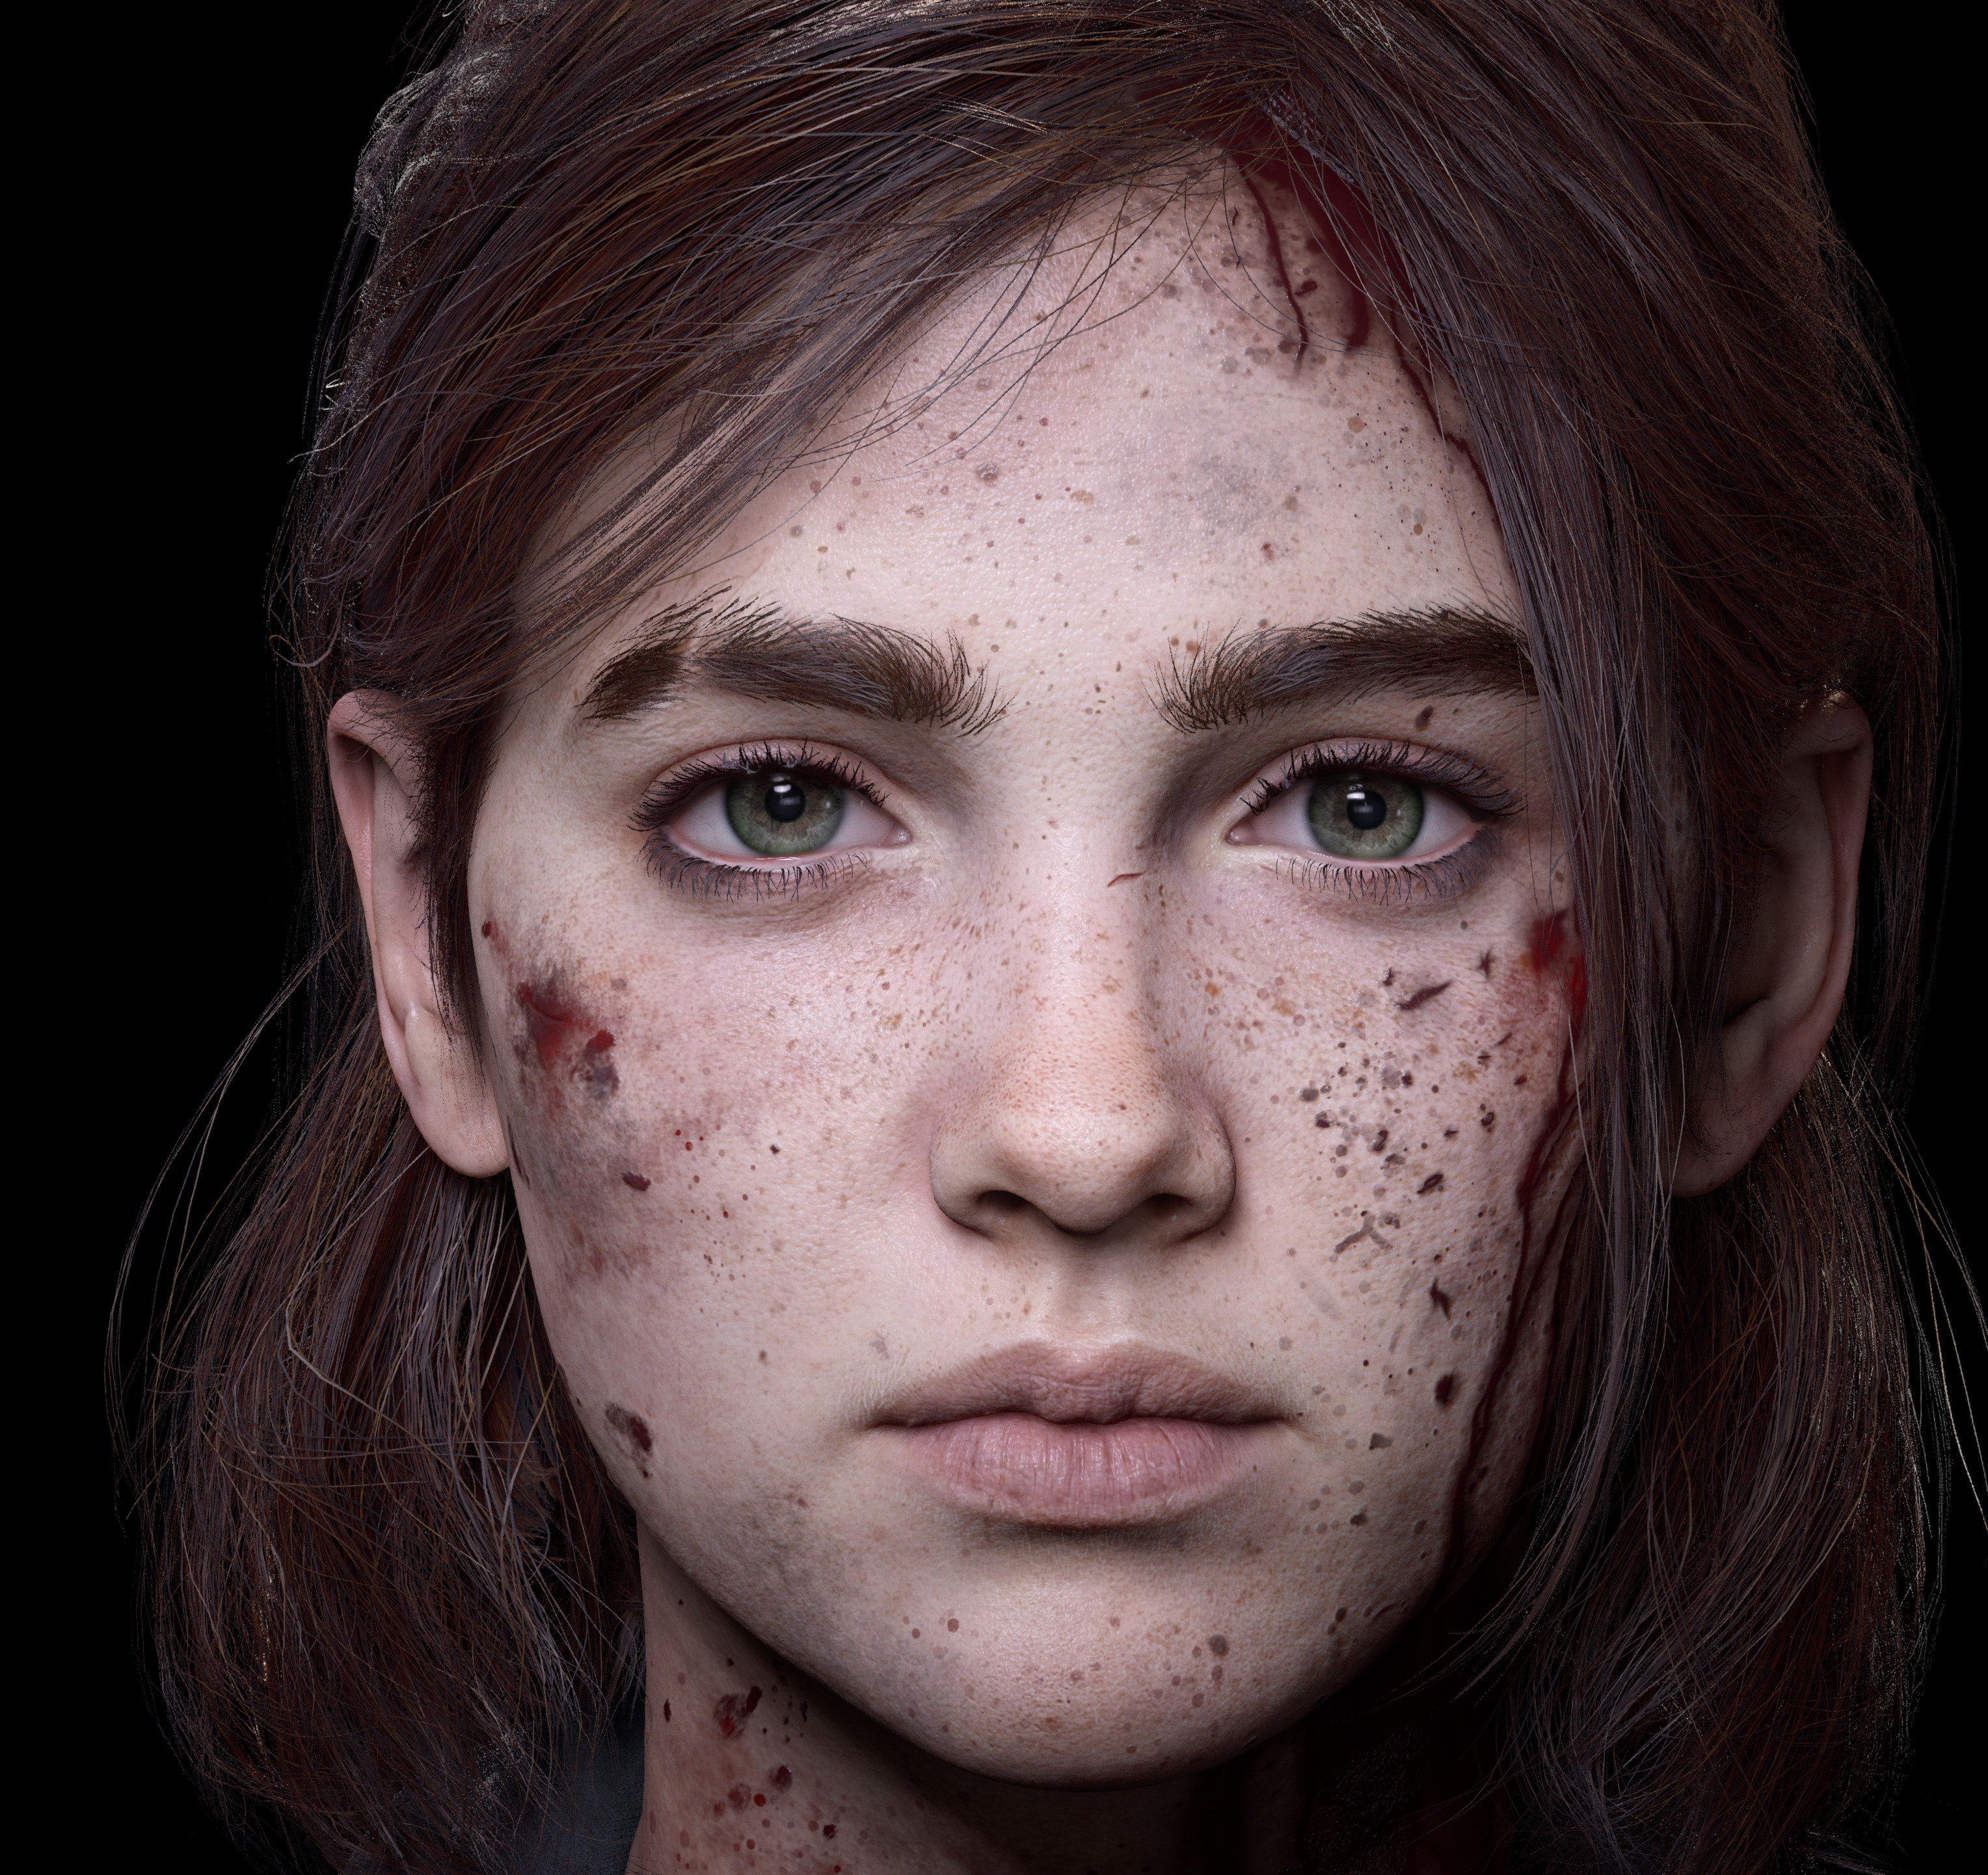 Pictures The Last of Us 2 Ellie Face female 3D Graphics 2560x1440